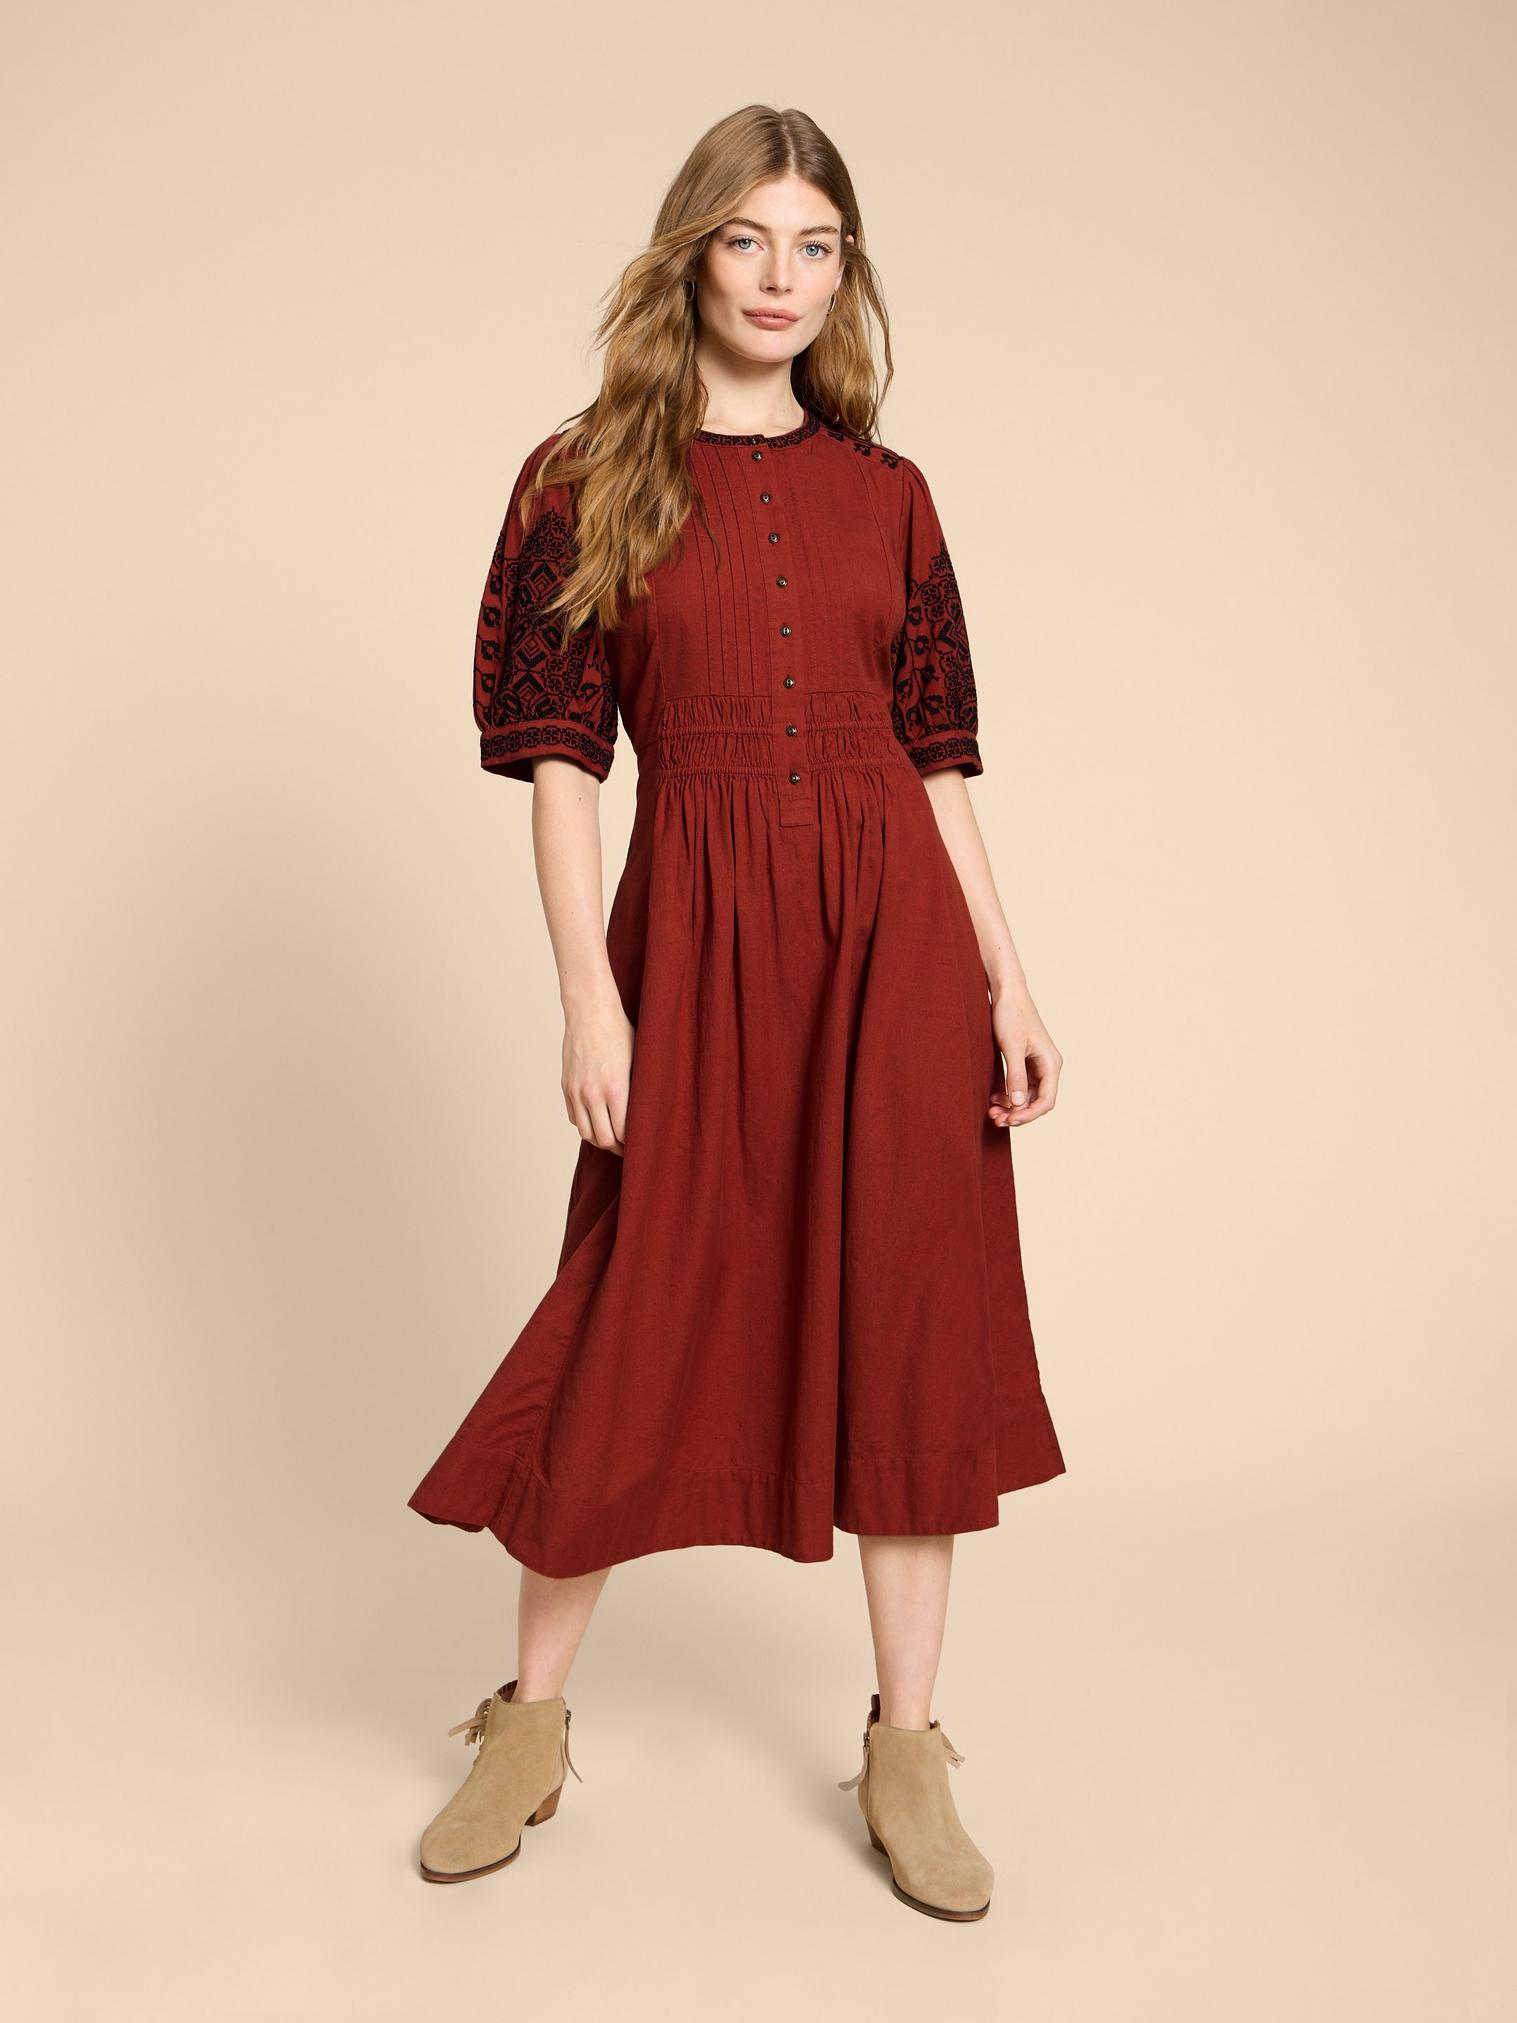 Celeste Embroidered Dress in RED MLT - LIFESTYLE